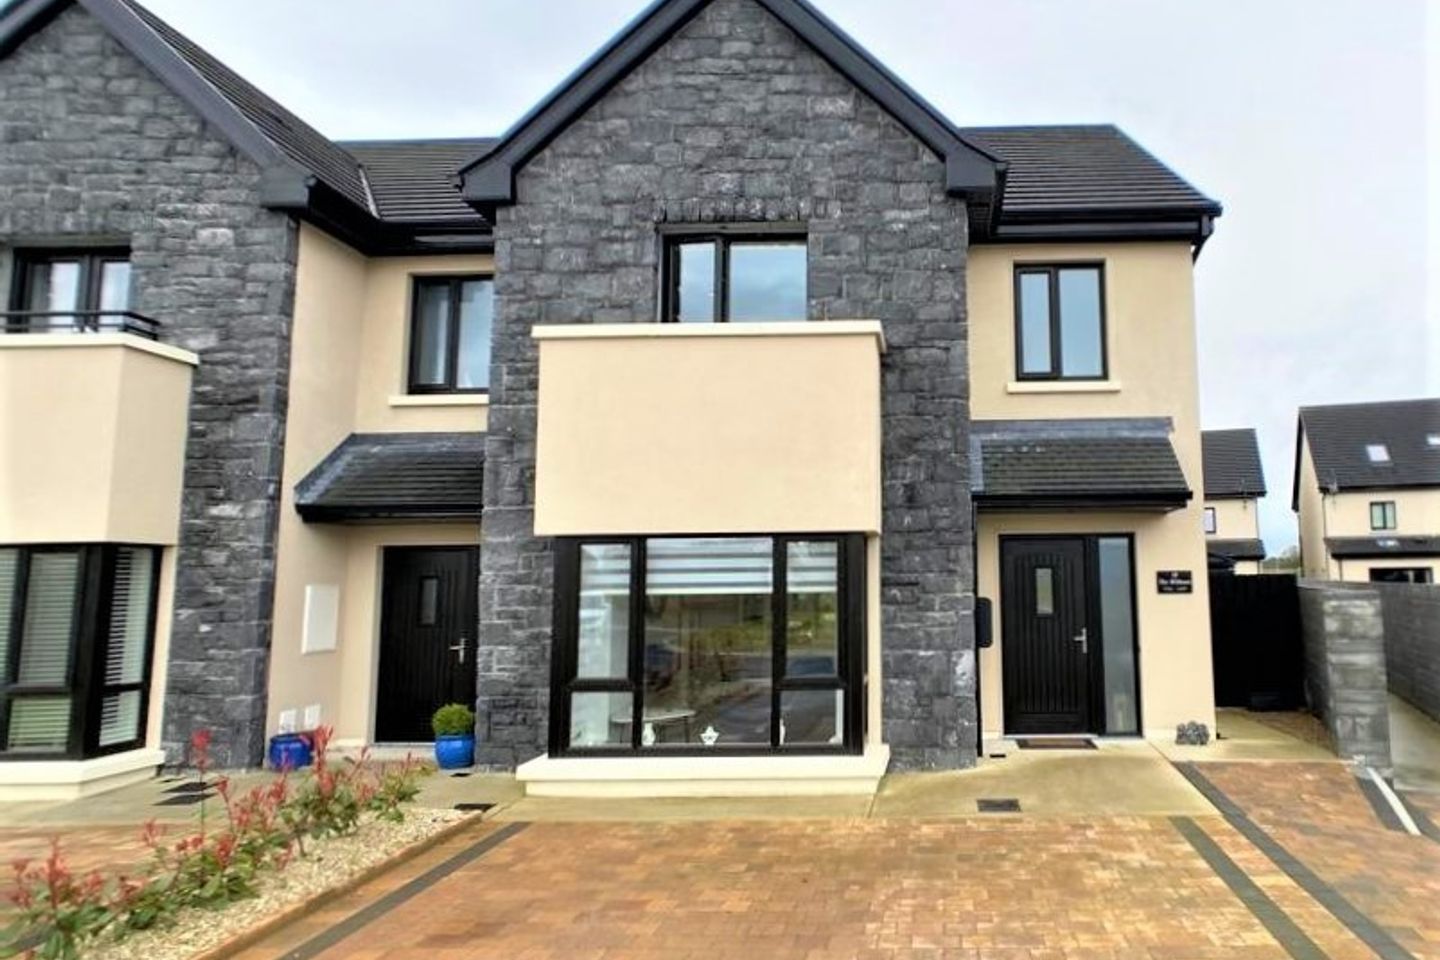 19 The Willows, Athenry, Co. Galway, H65HN77